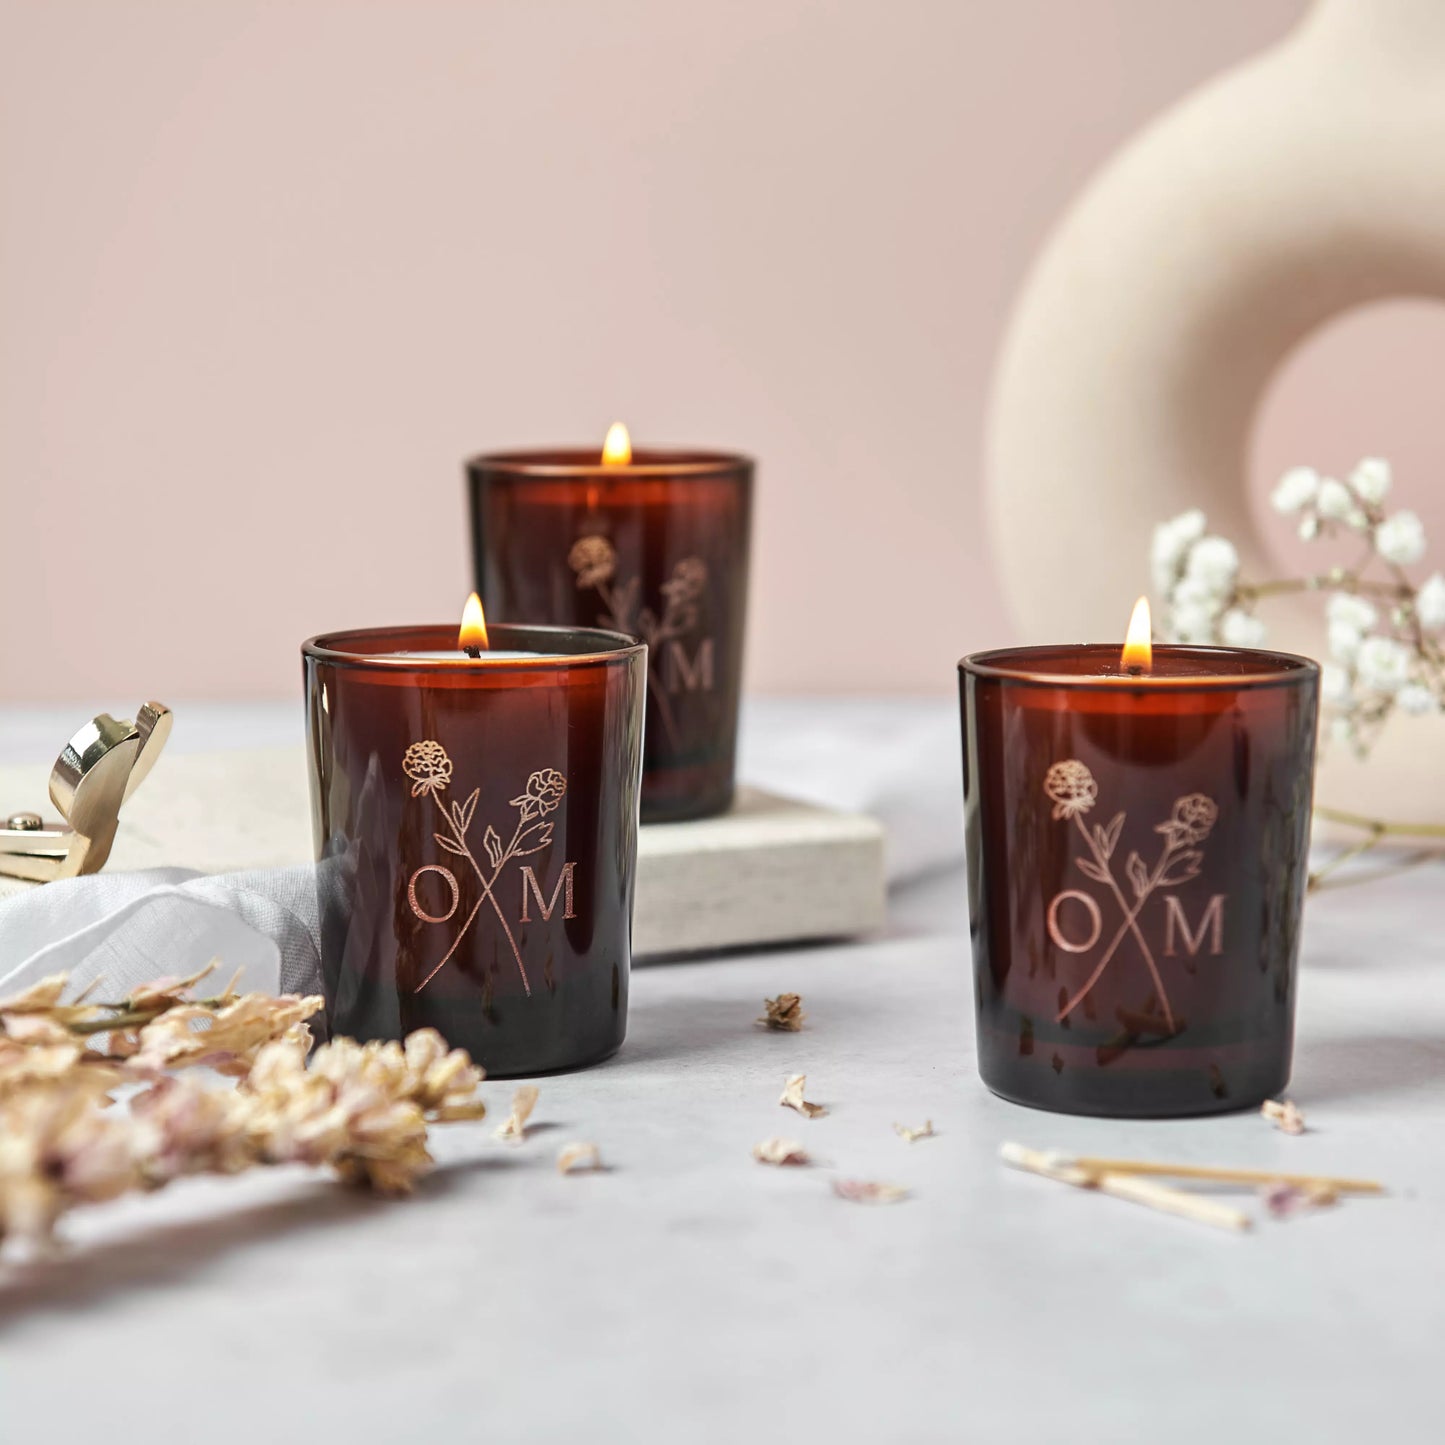 A trio of candles from our Spring Collection candle giftset. The candlelight brightens up the etched logo in the glass.